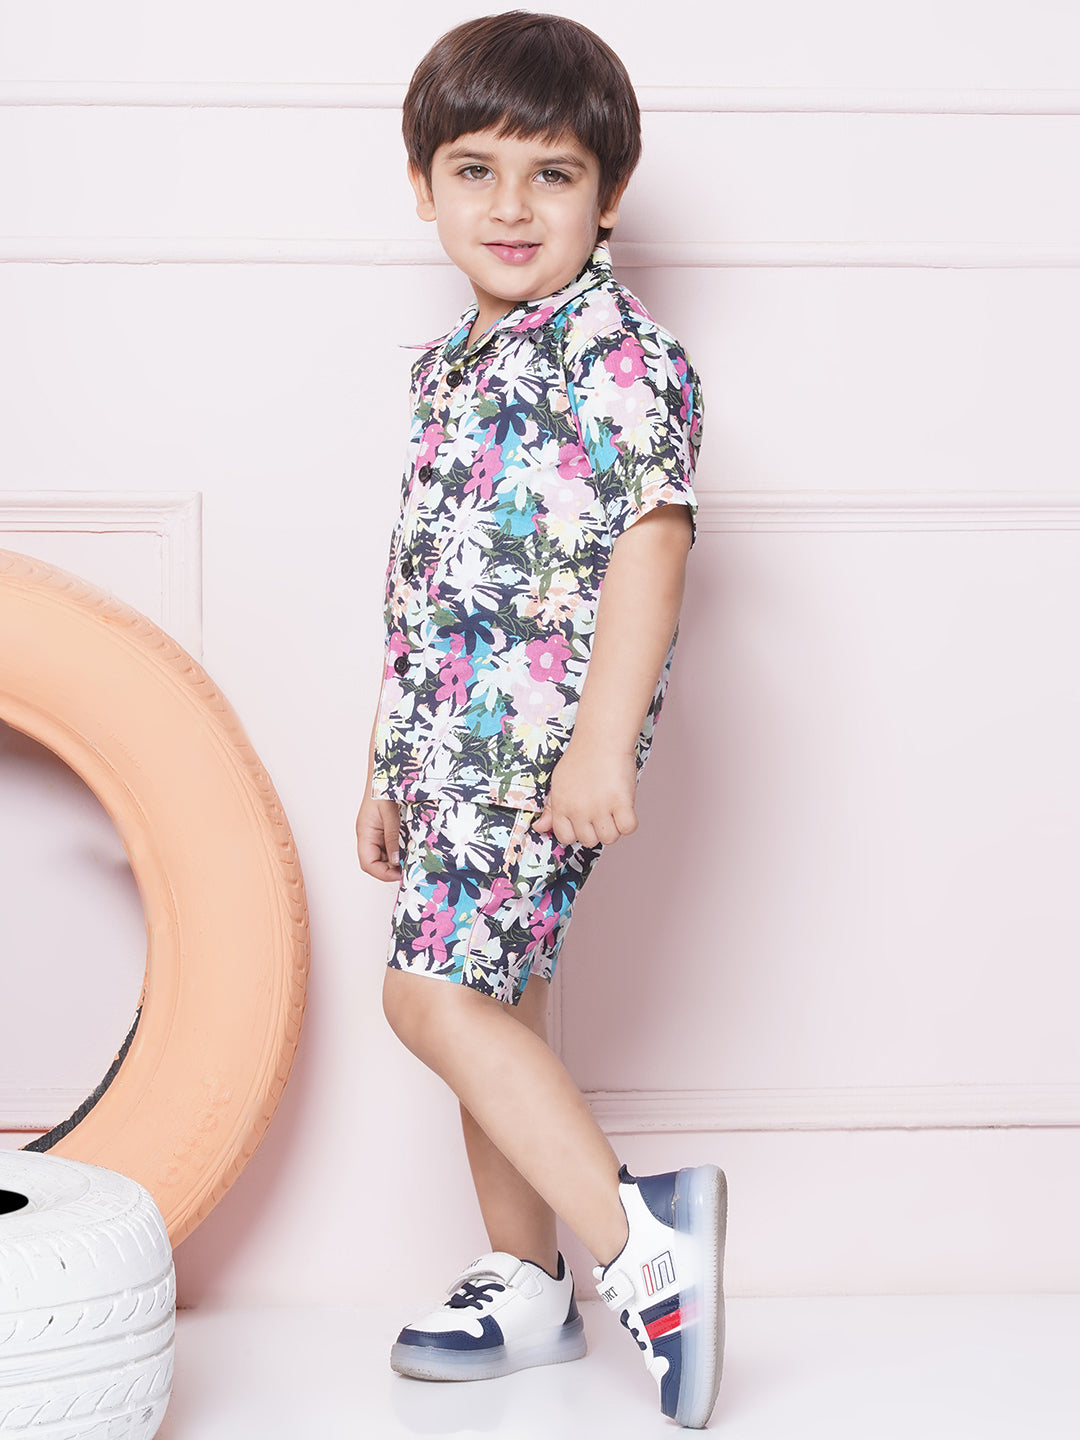 AJ Dezines Multi-Color Cotton Shirt & shorts Half Sleeves with Collar and Floral CO-ORDS Set for Boys